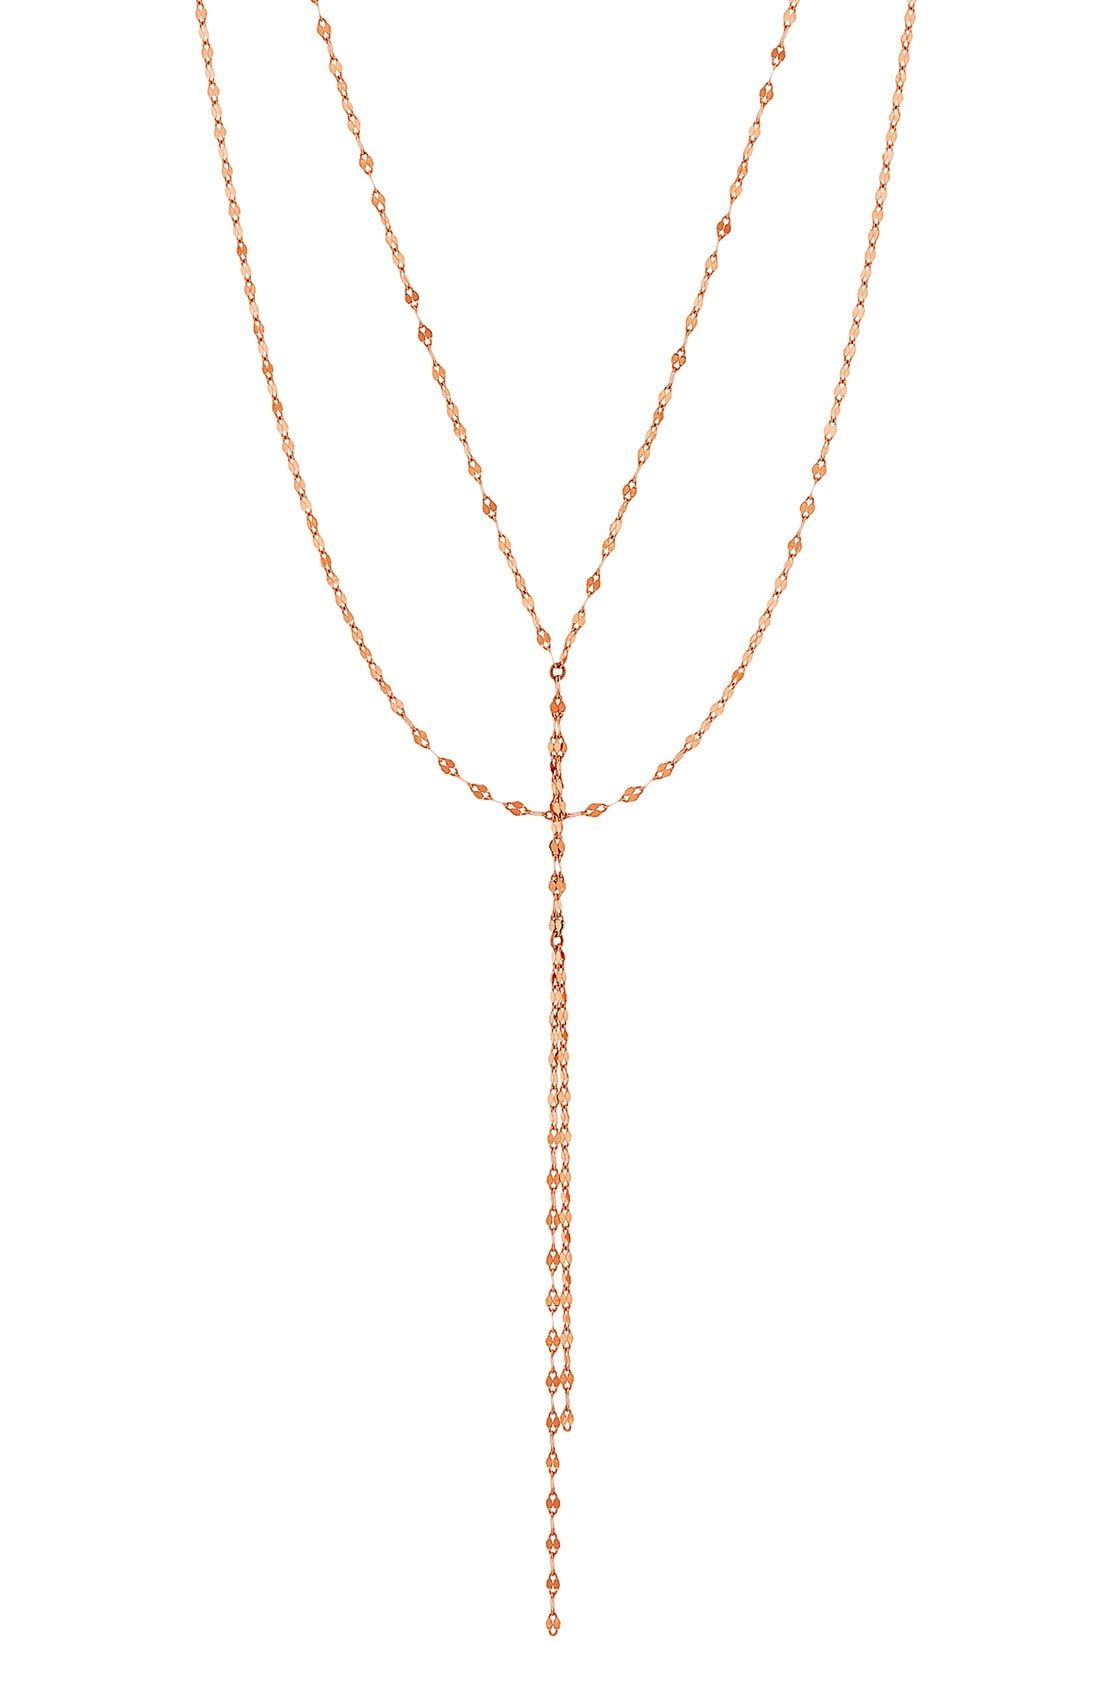 Women's Multi Strand Necklaces | Nordstrom Within Current String Of Beads Y  Necklaces (View 11 of 25)